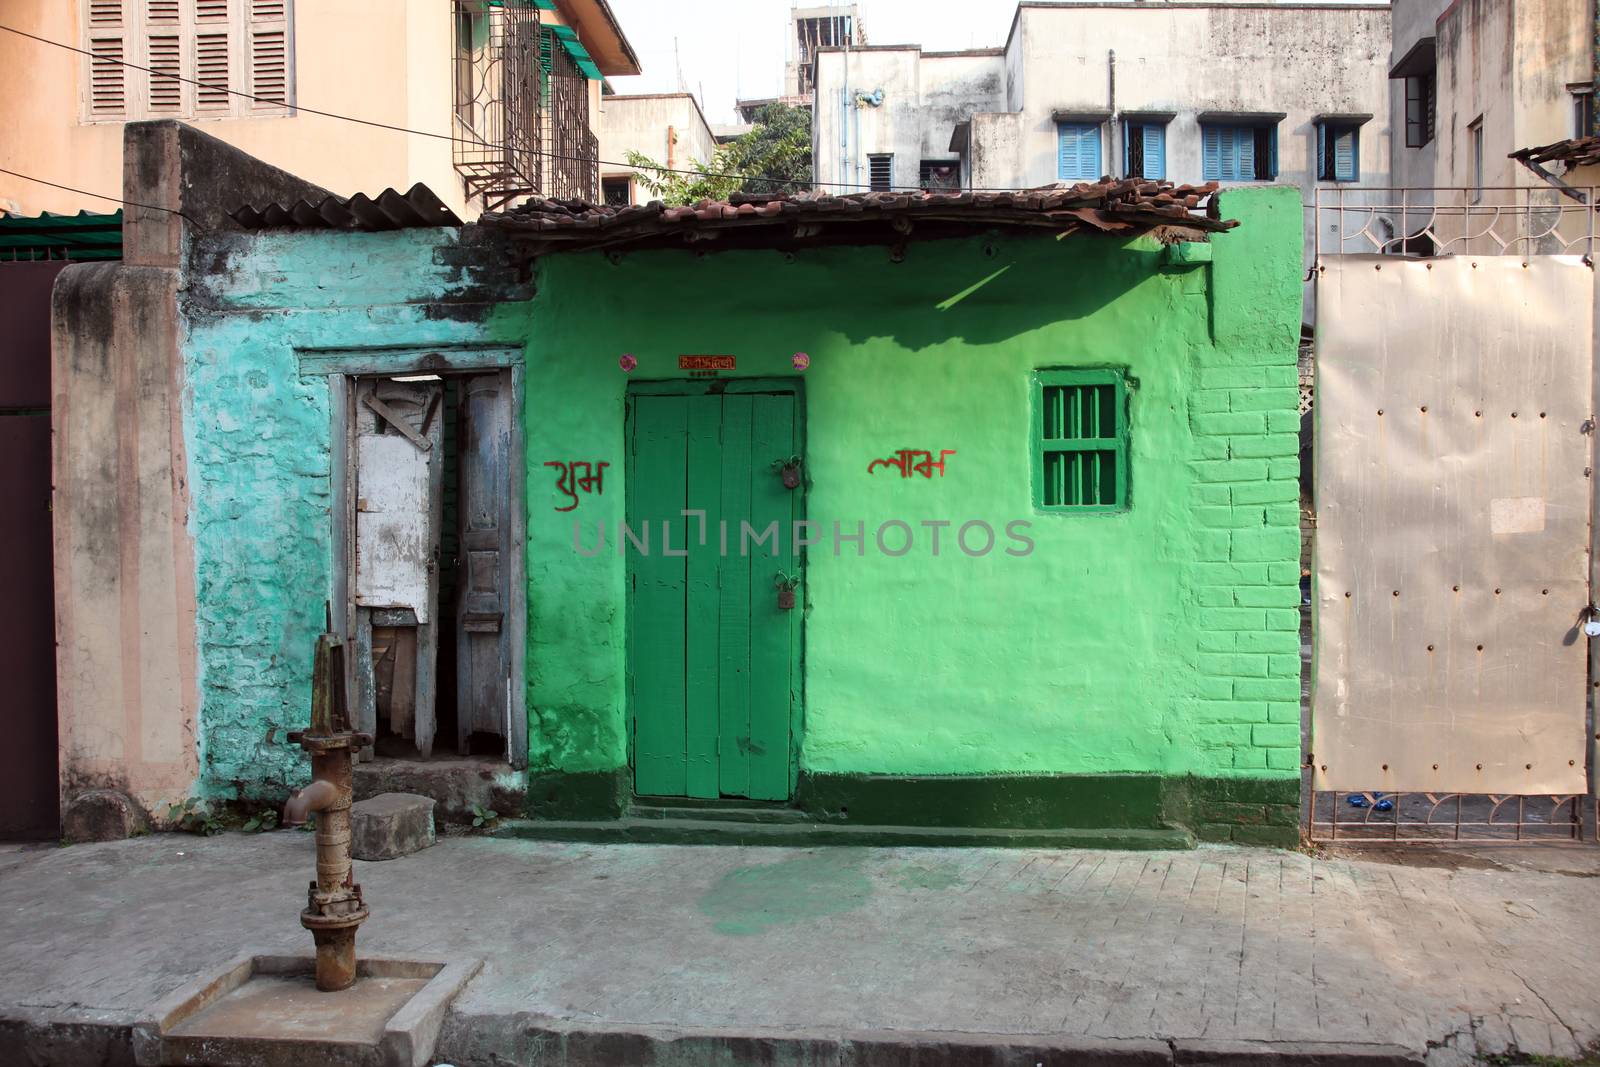 Colorful Indian house. Bright green building in Kolkata, West Bengal, India on February 23, 2012.